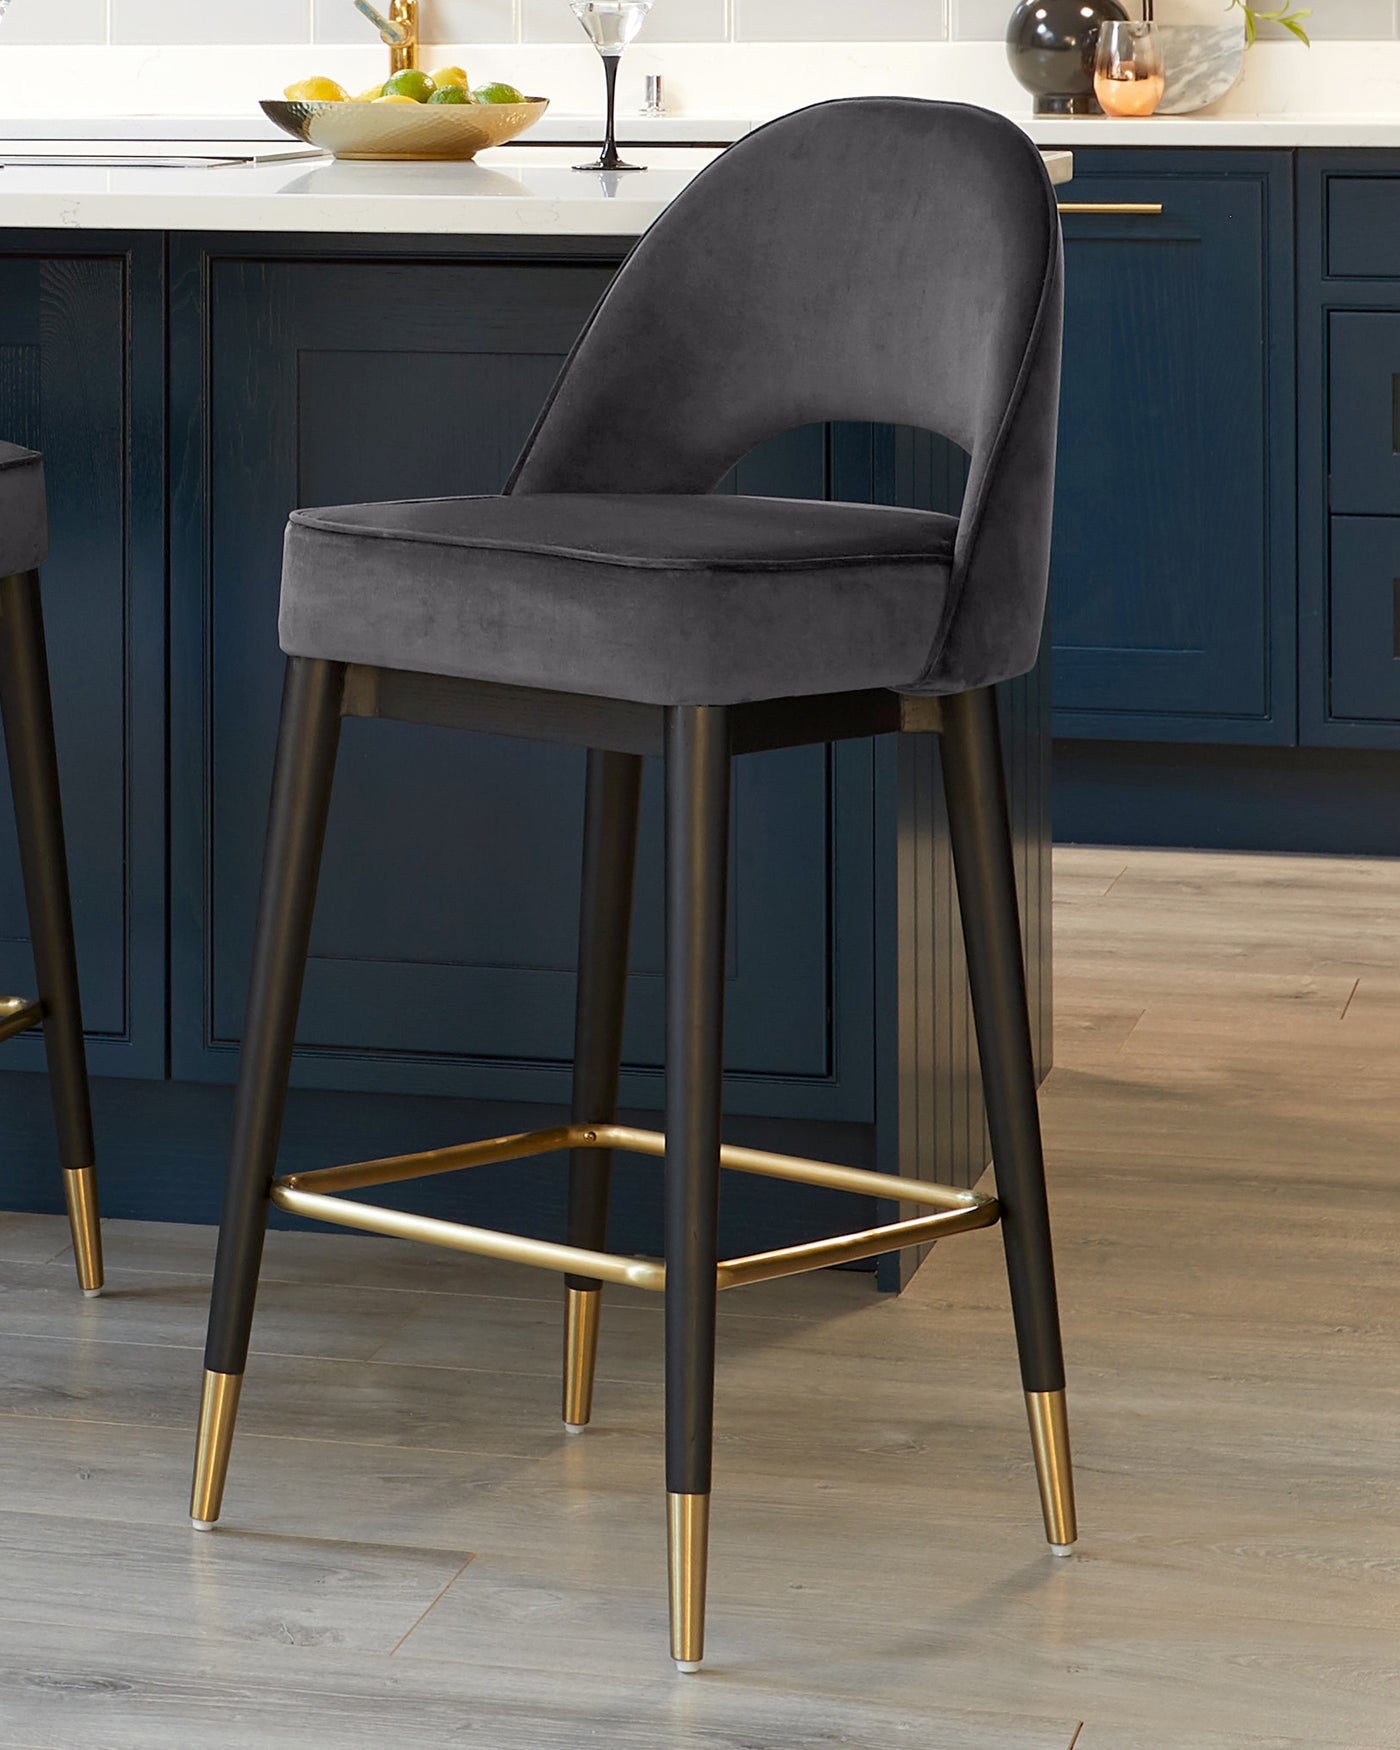 Elegant contemporary bar stool featuring a curved back, plush grey velvet upholstery, and four slender metal legs in a black finish with gold-coloured tips and a matching gold footrest.